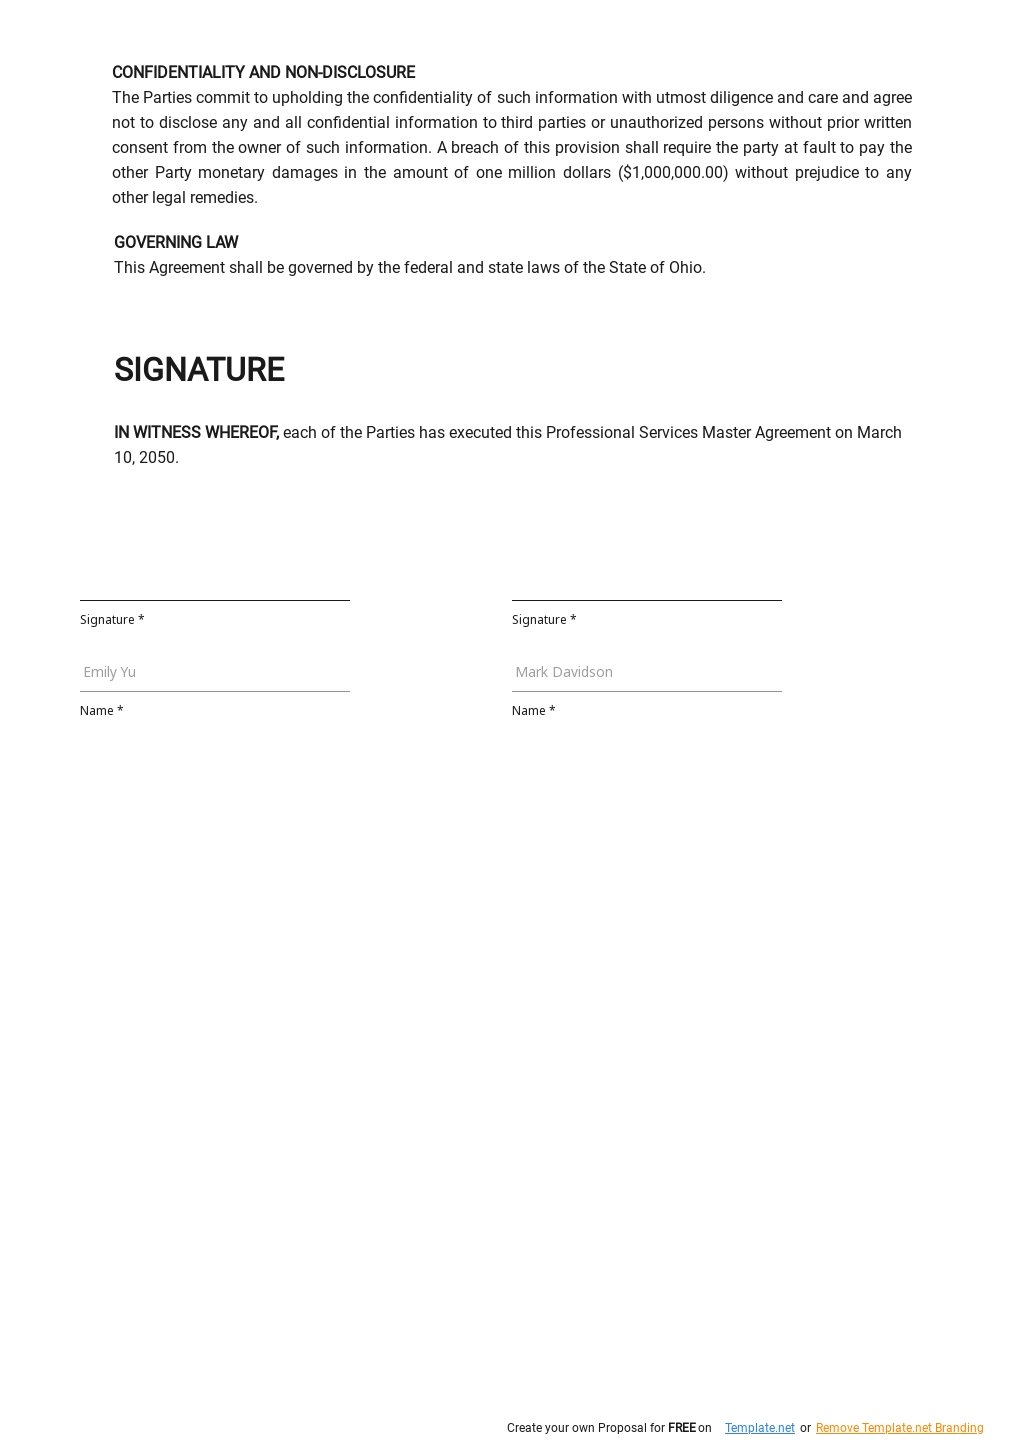 Professional Services Master Agreement Template 2.jpe